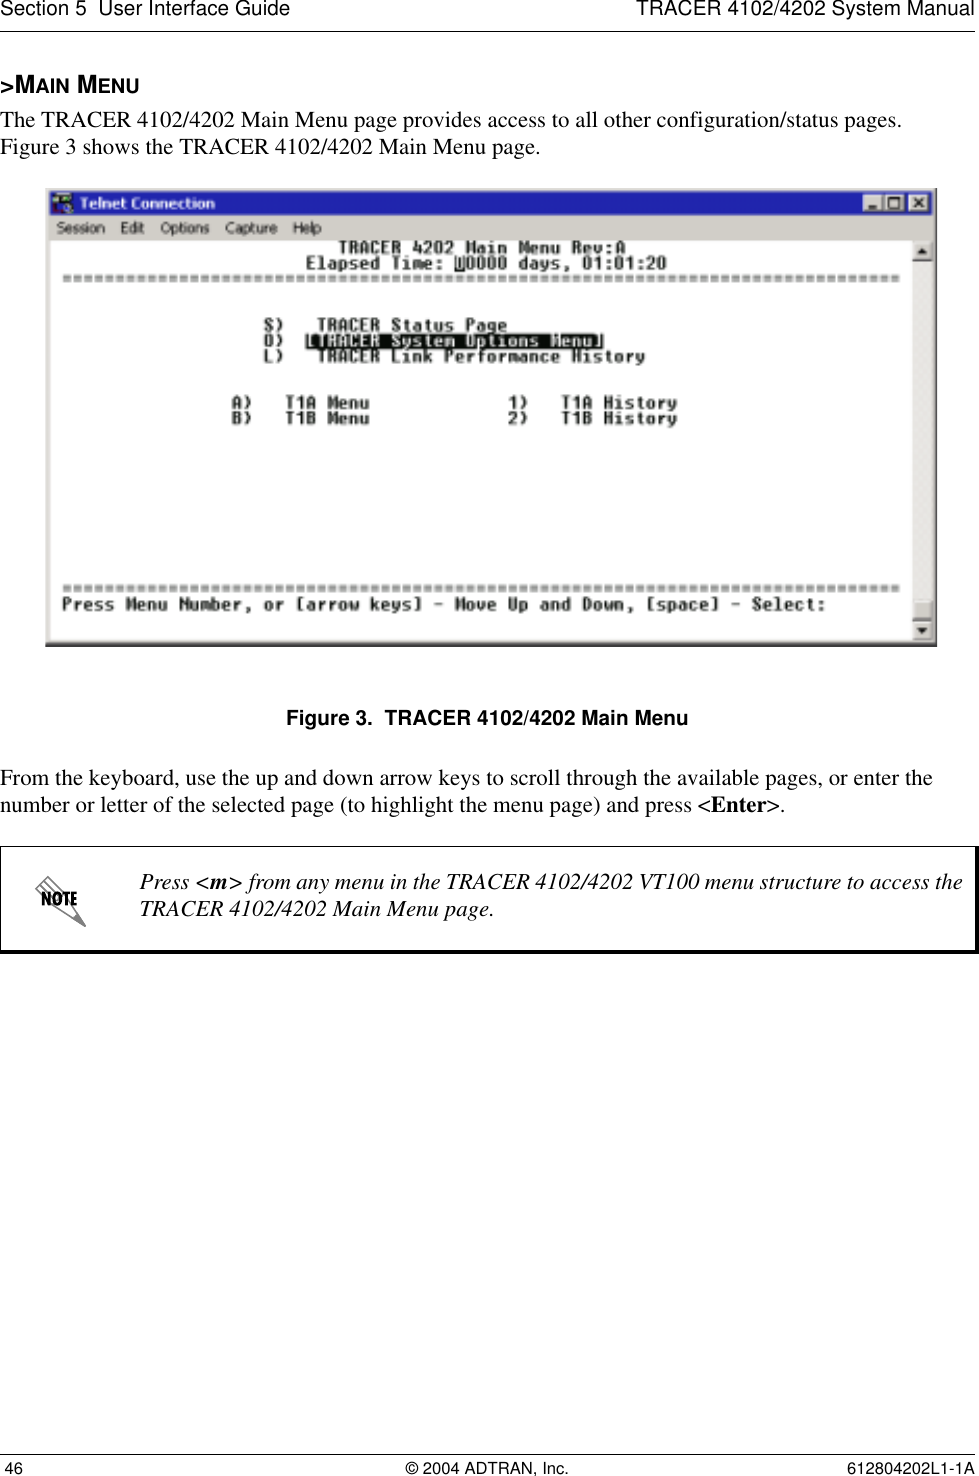 Section 5  User Interface Guide TRACER 4102/4202 System Manual 46 © 2004 ADTRAN, Inc. 612804202L1-1A&gt;MAIN MENUThe TRACER 4102/4202 Main Menu page provides access to all other configuration/status pages. Figure 3 shows the TRACER 4102/4202 Main Menu page.Figure 3.  TRACER 4102/4202 Main MenuFrom the keyboard, use the up and down arrow keys to scroll through the available pages, or enter the number or letter of the selected page (to highlight the menu page) and press &lt;Enter&gt;.Press &lt;m&gt; from any menu in the TRACER 4102/4202 VT100 menu structure to access the TRACER 4102/4202 Main Menu page.